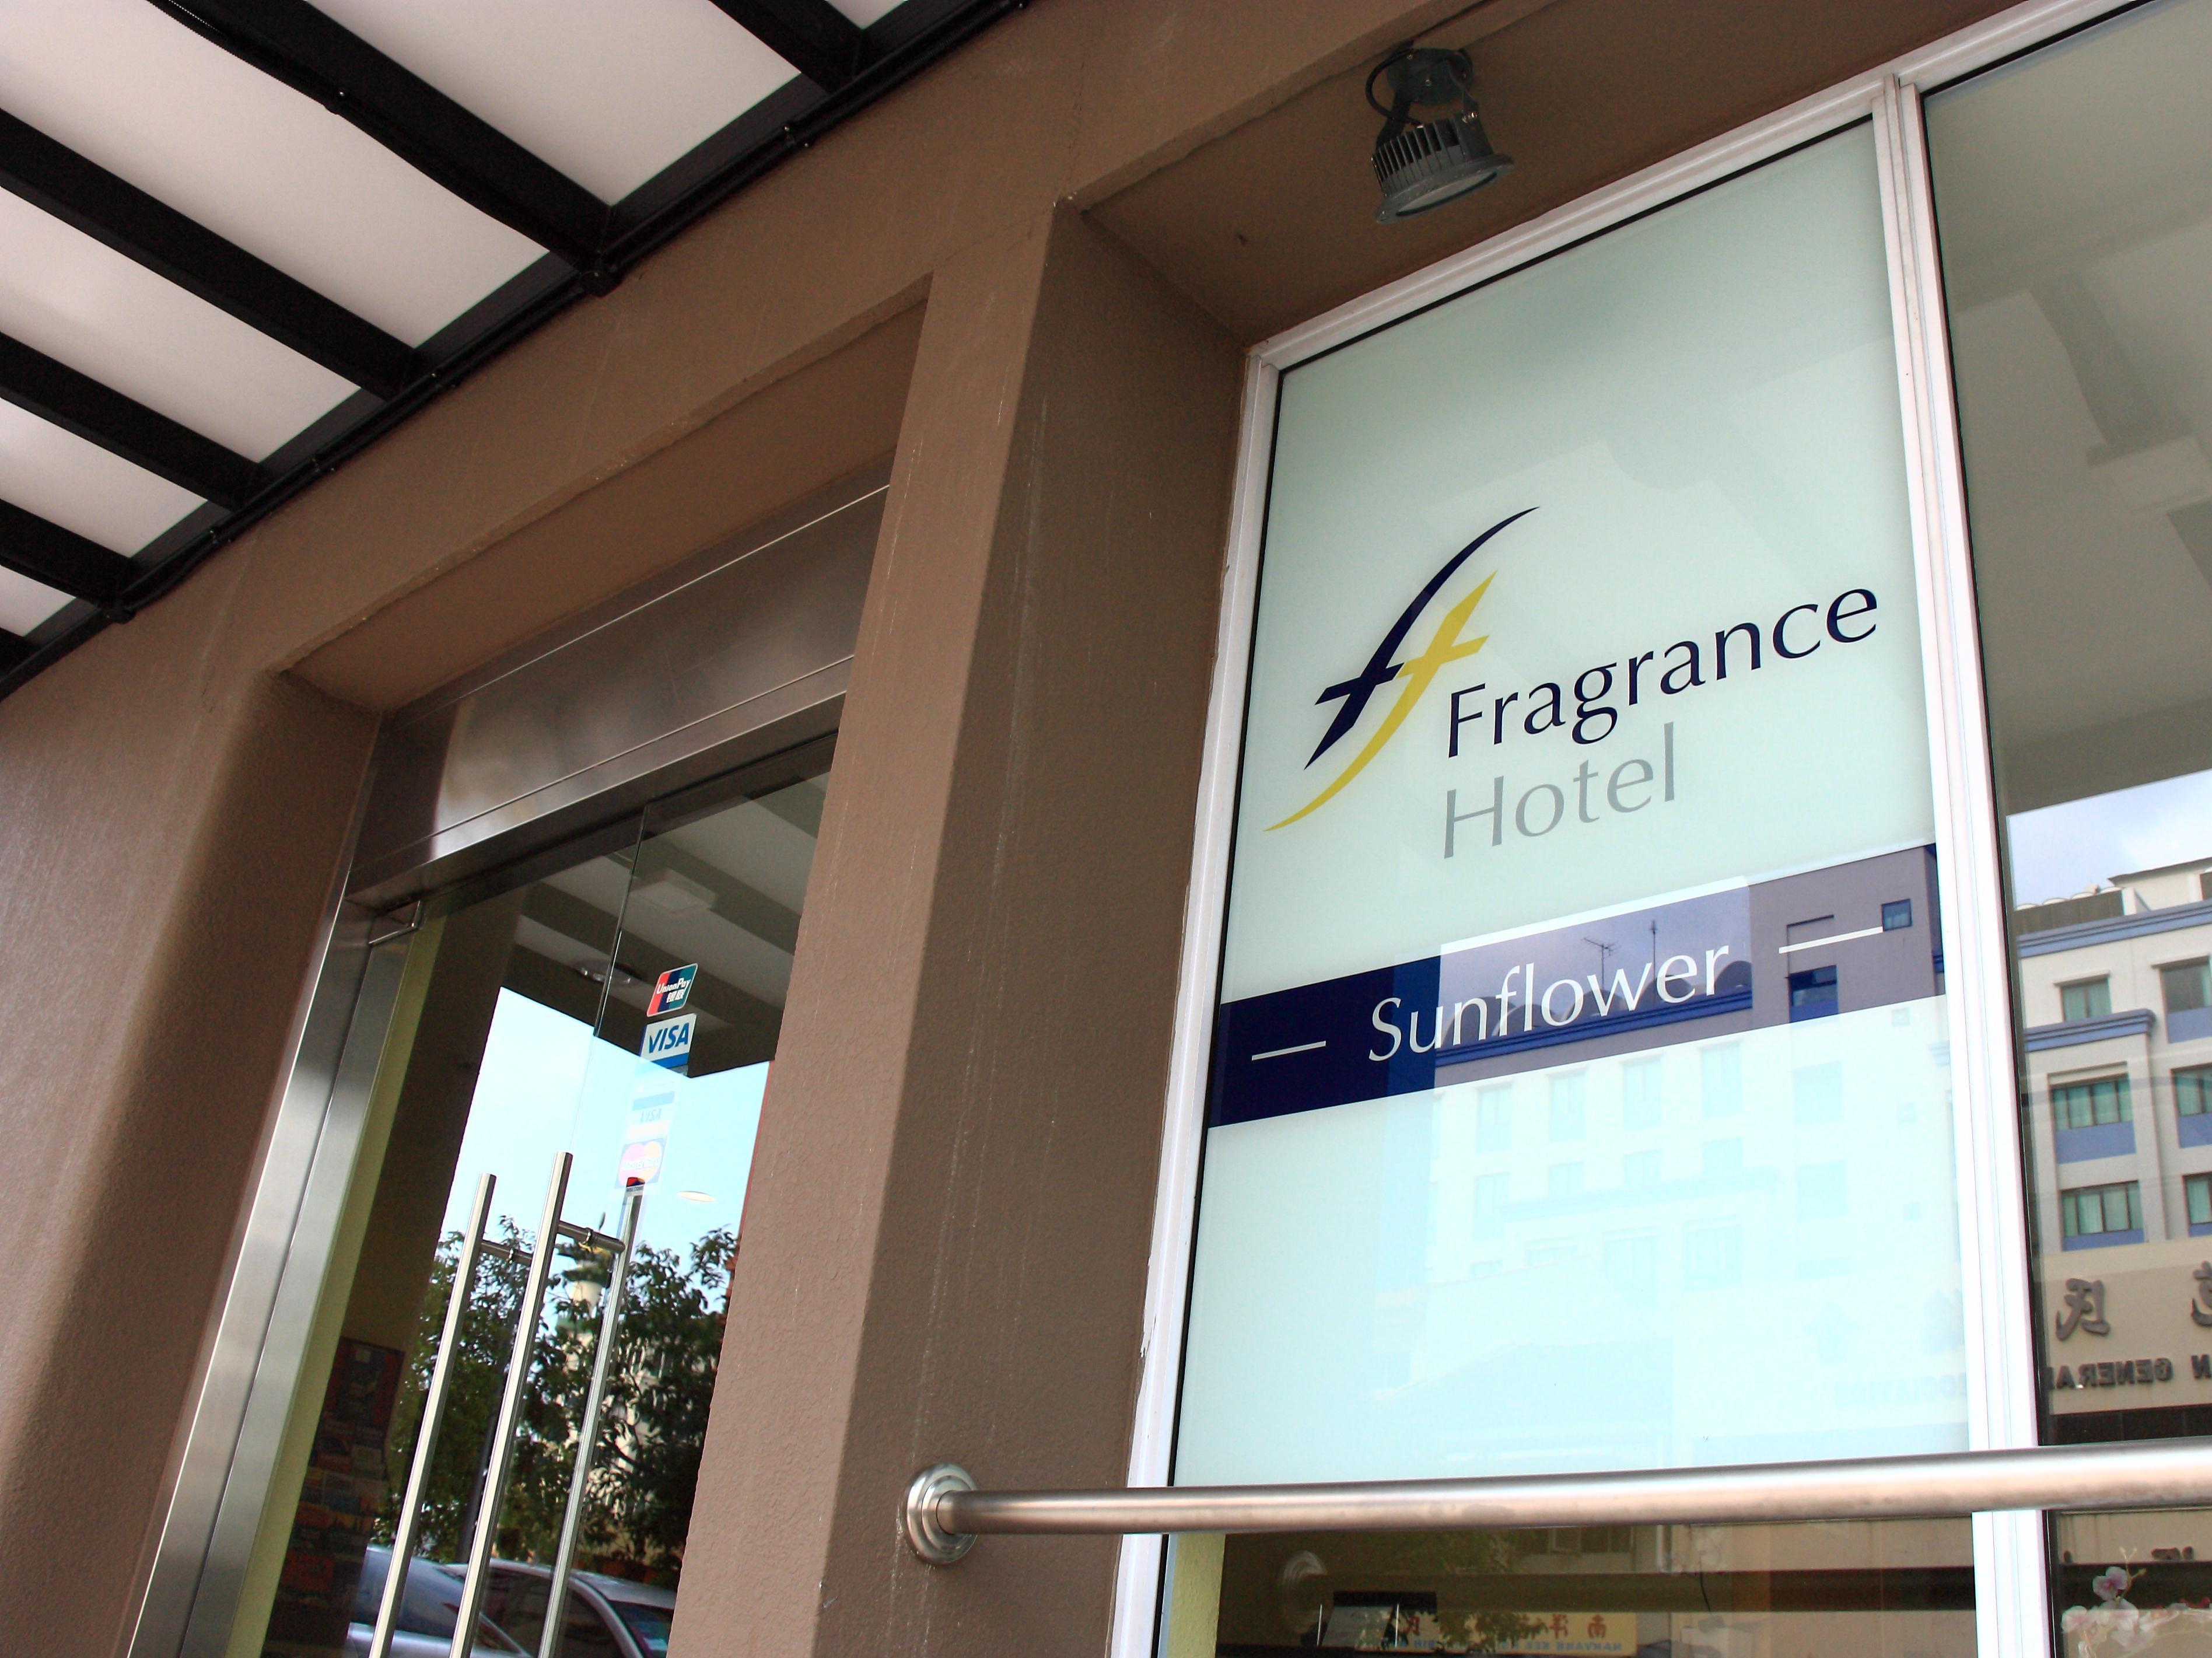 Fragrance Hotel - Sunflower Singapore FAQ 2017, What facilities are there in Fragrance Hotel - Sunflower Singapore 2017, What Languages Spoken are Supported in Fragrance Hotel - Sunflower Singapore 2017, Which payment cards are accepted in Fragrance Hotel - Sunflower Singapore , Singapore Fragrance Hotel - Sunflower room facilities and services Q&A 2017, Singapore Fragrance Hotel - Sunflower online booking services 2017, Singapore Fragrance Hotel - Sunflower address 2017, Singapore Fragrance Hotel - Sunflower telephone number 2017,Singapore Fragrance Hotel - Sunflower map 2017, Singapore Fragrance Hotel - Sunflower traffic guide 2017, how to go Singapore Fragrance Hotel - Sunflower, Singapore Fragrance Hotel - Sunflower booking online 2017, Singapore Fragrance Hotel - Sunflower room types 2017.